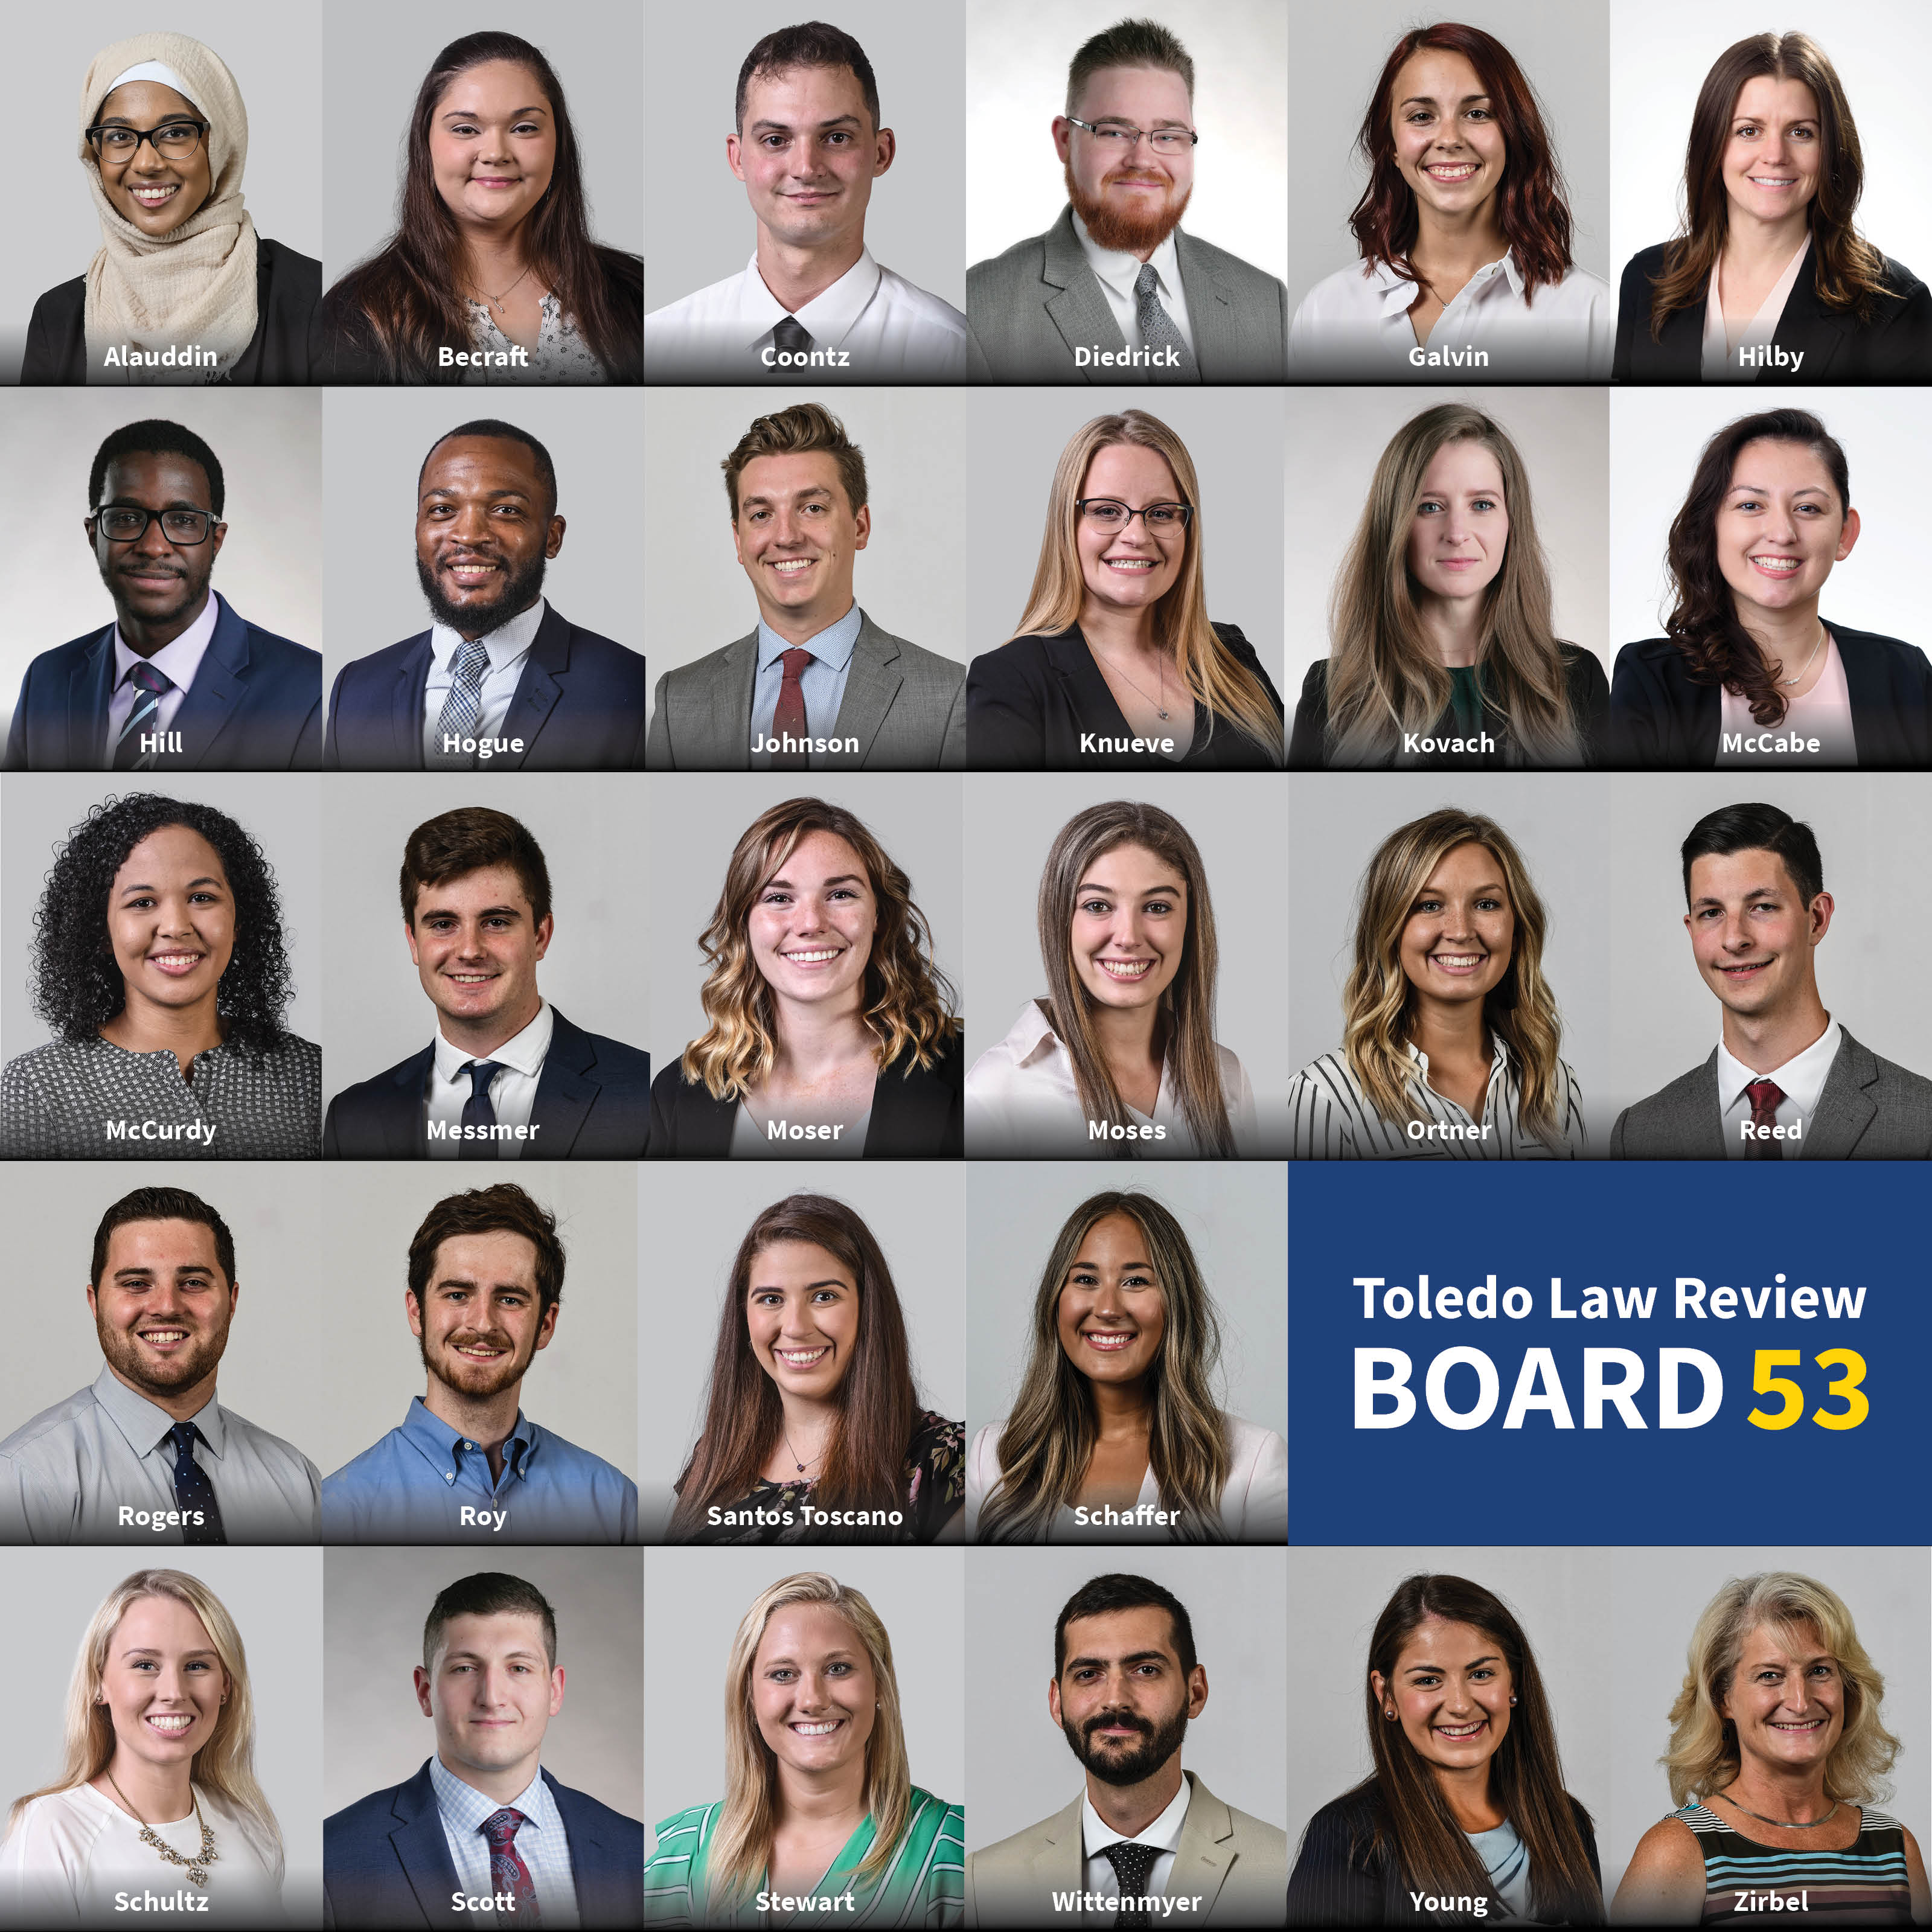 Law Review Board 53